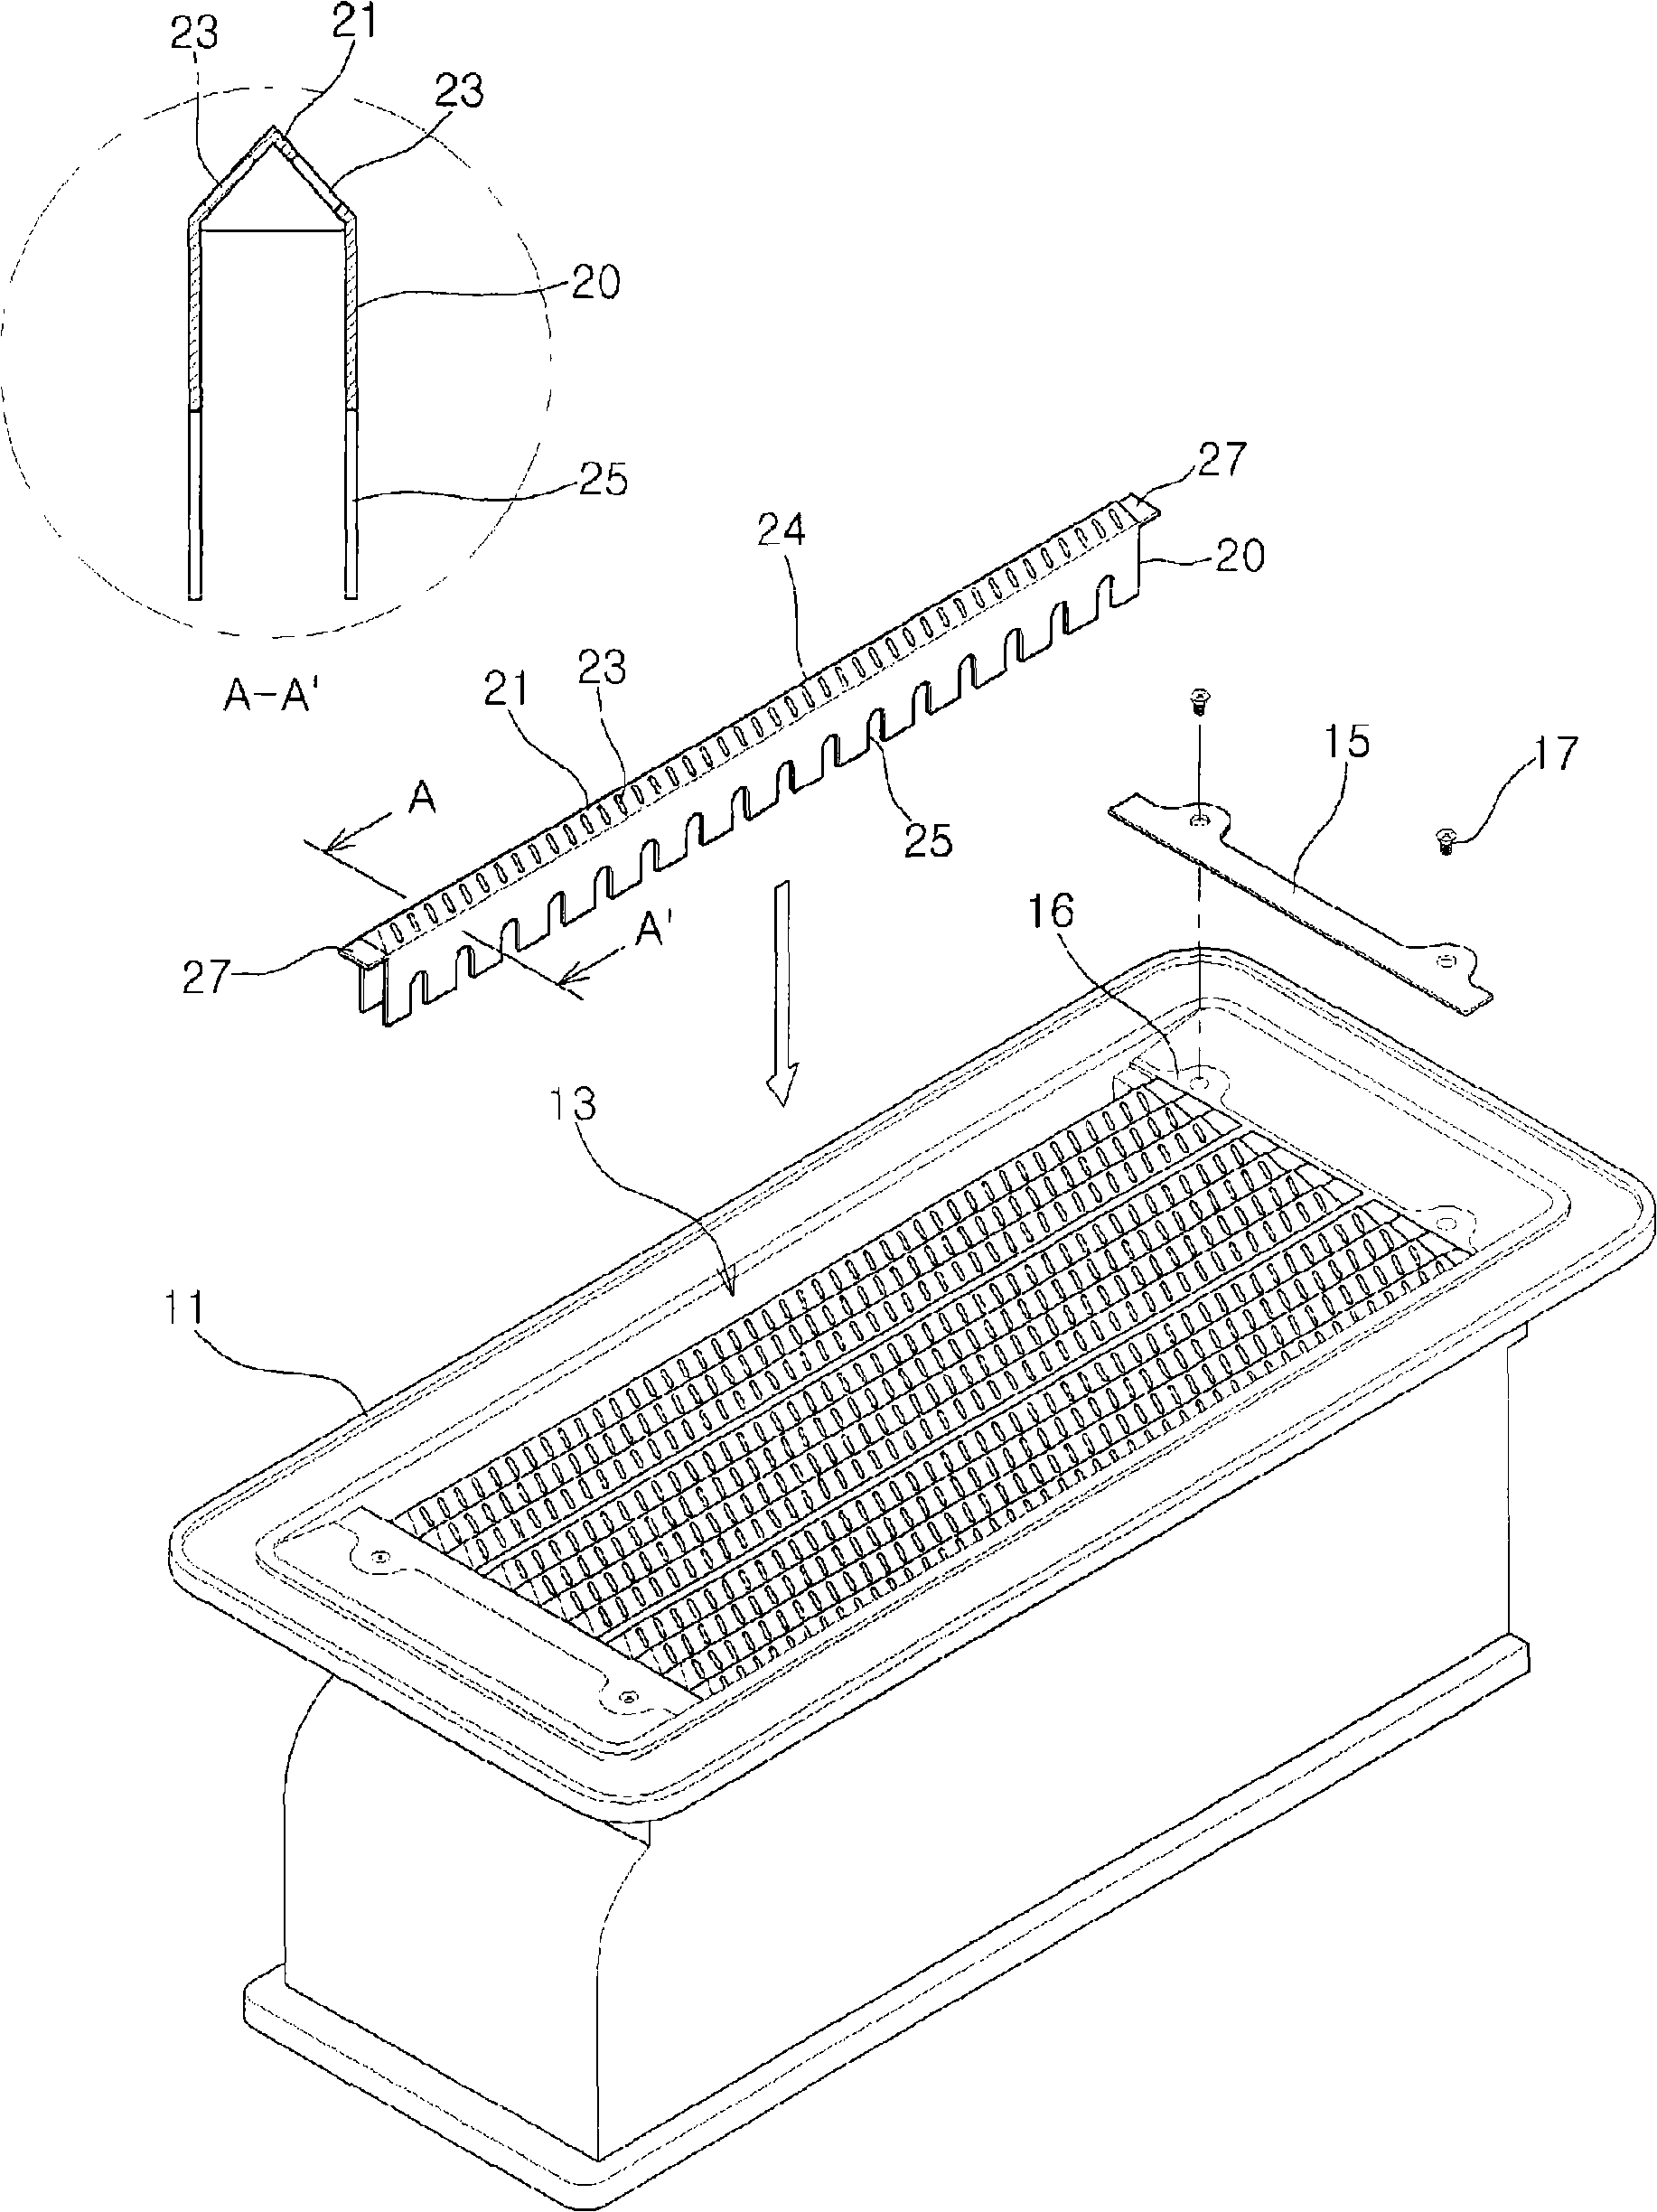 Flame hole structure of gas burner